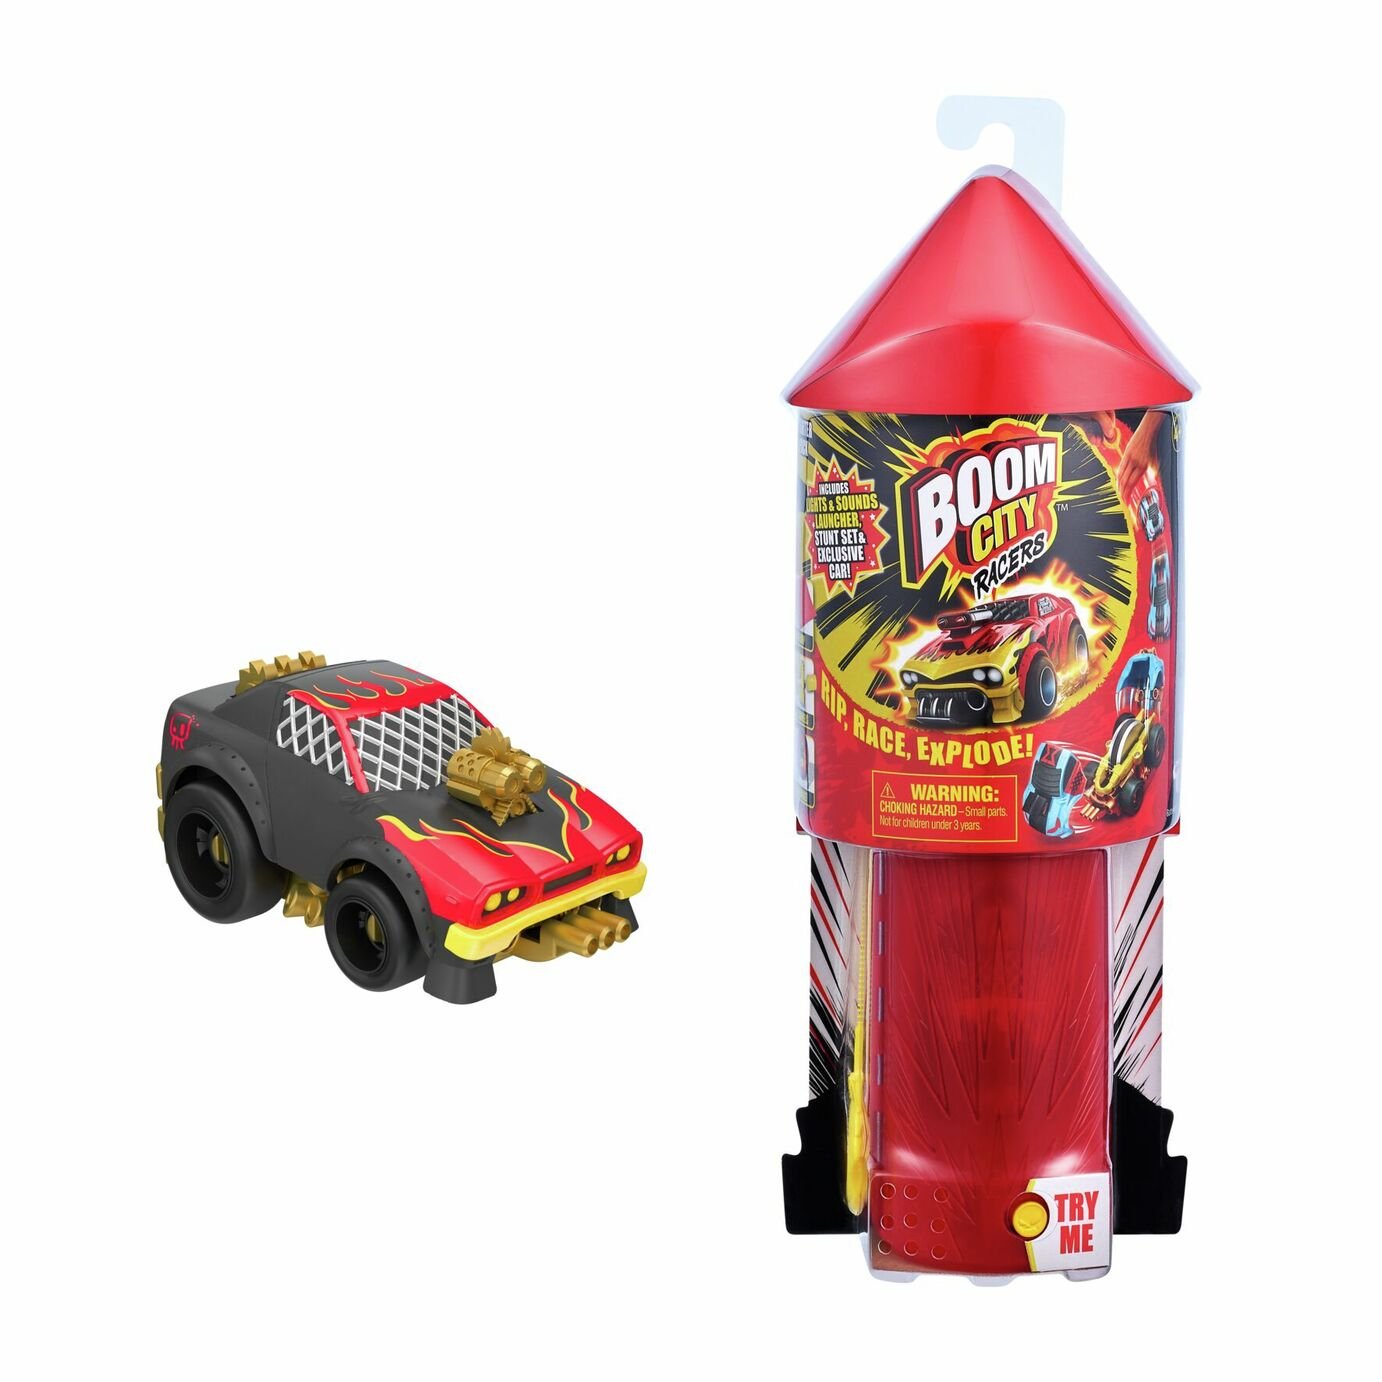 Boom City Racers Car Launcher Stunt Playset plus Hot Dawg! Review